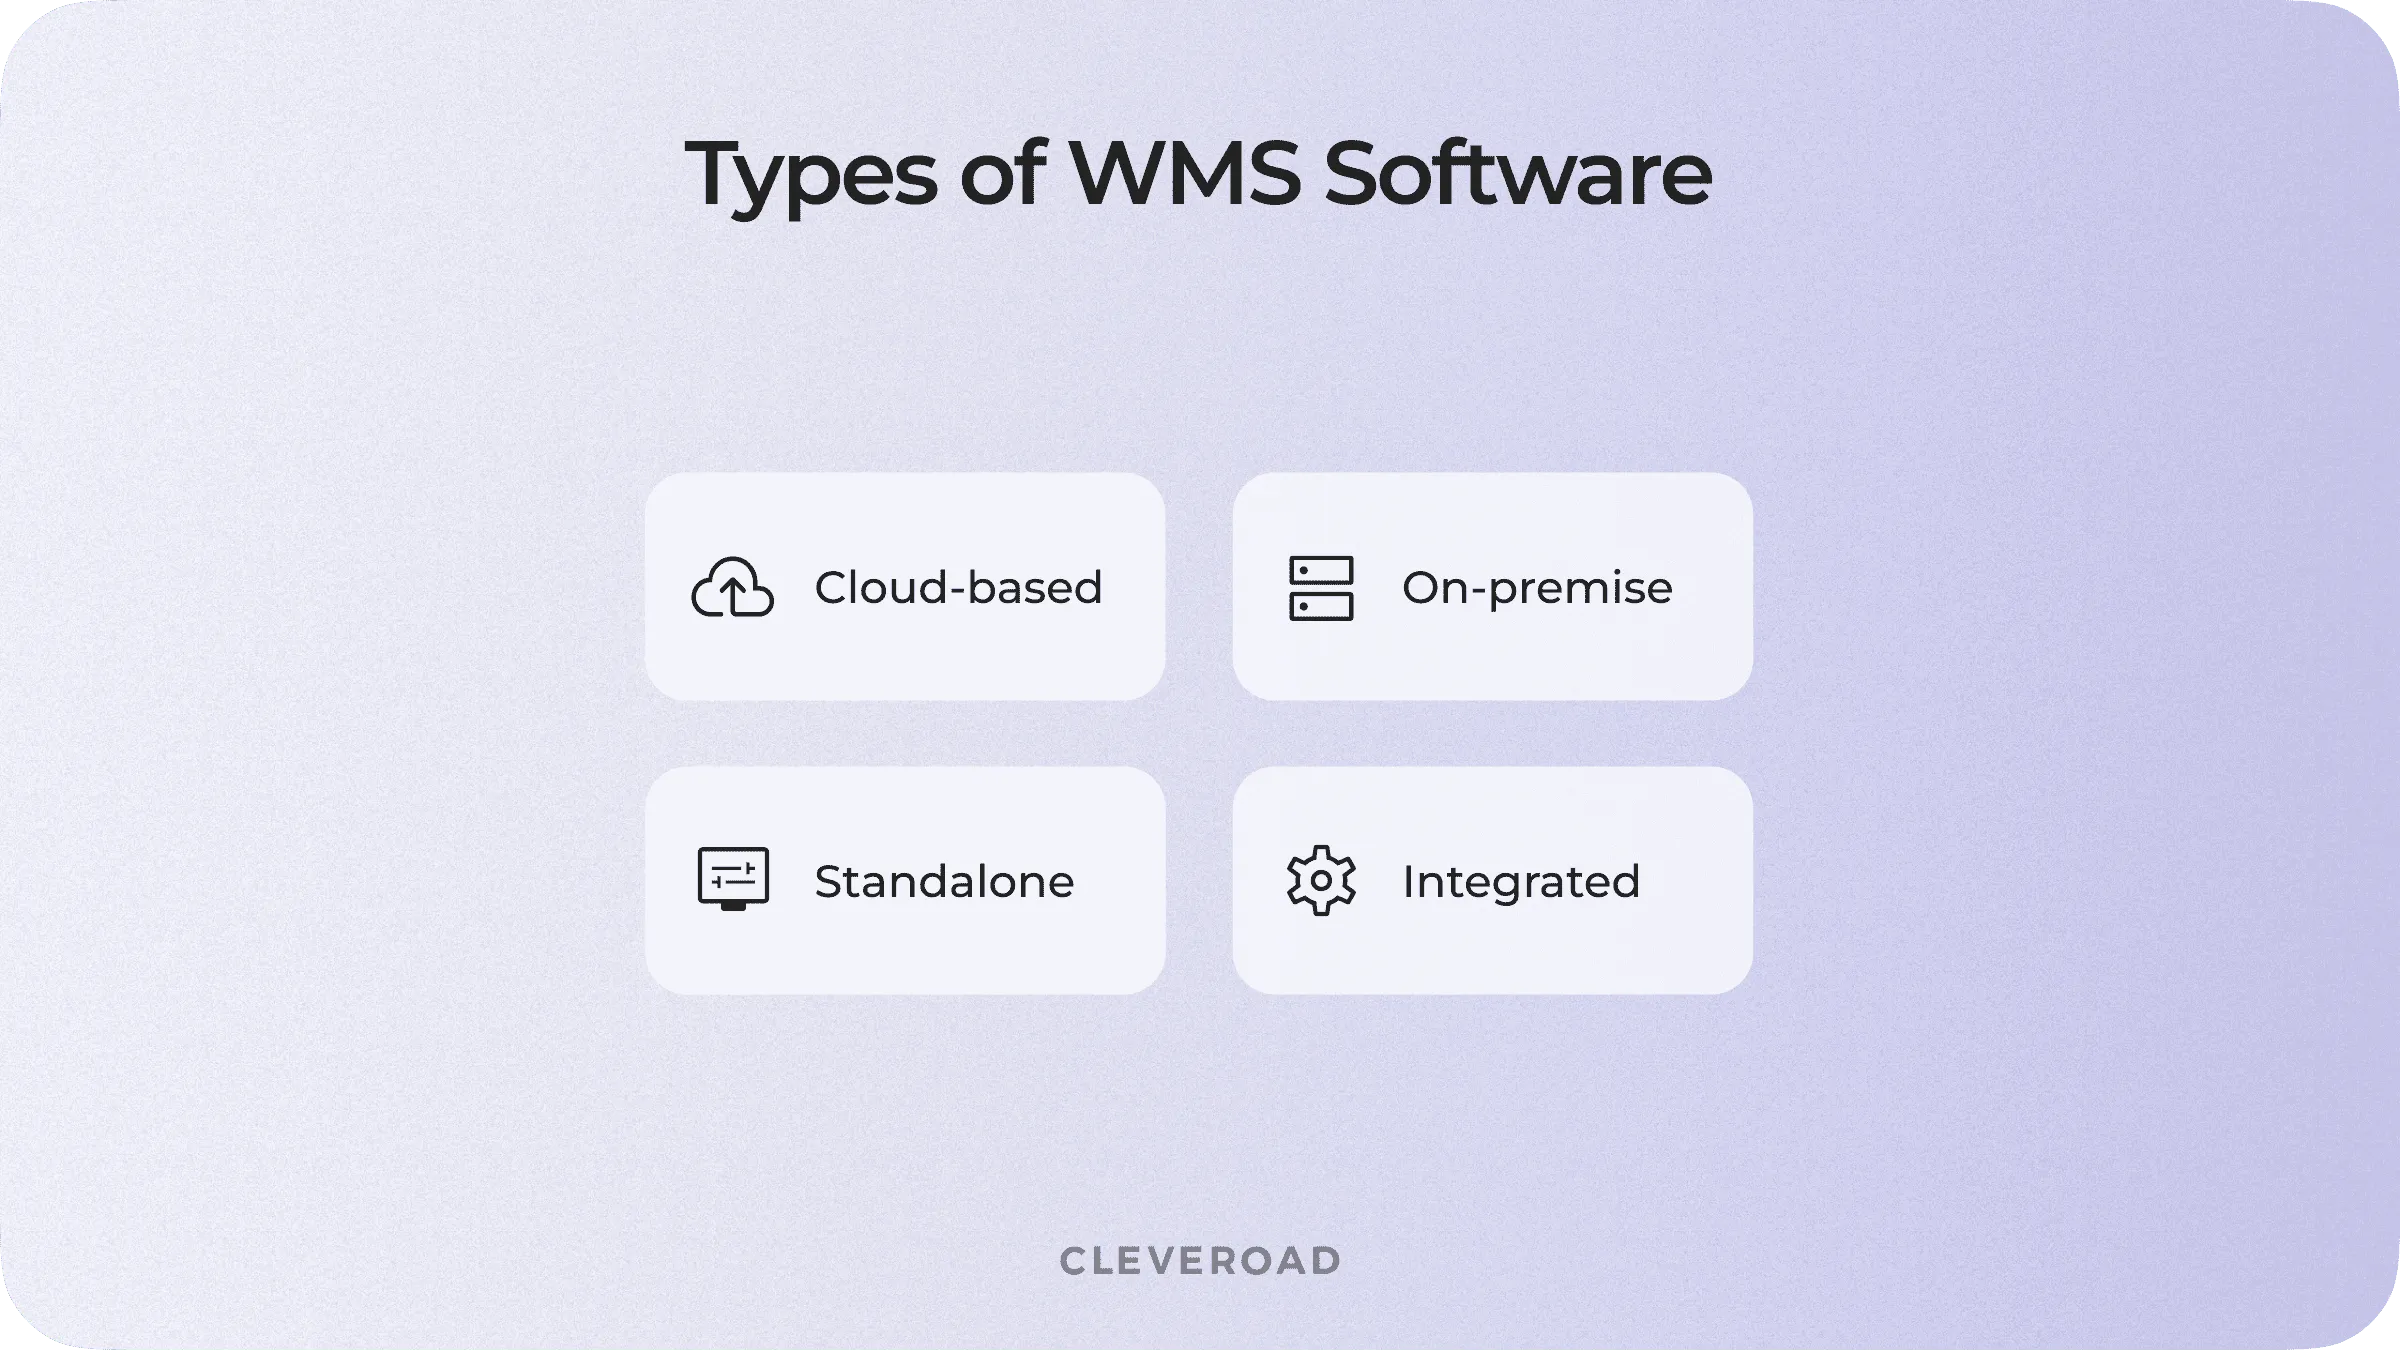 Types of WMS software